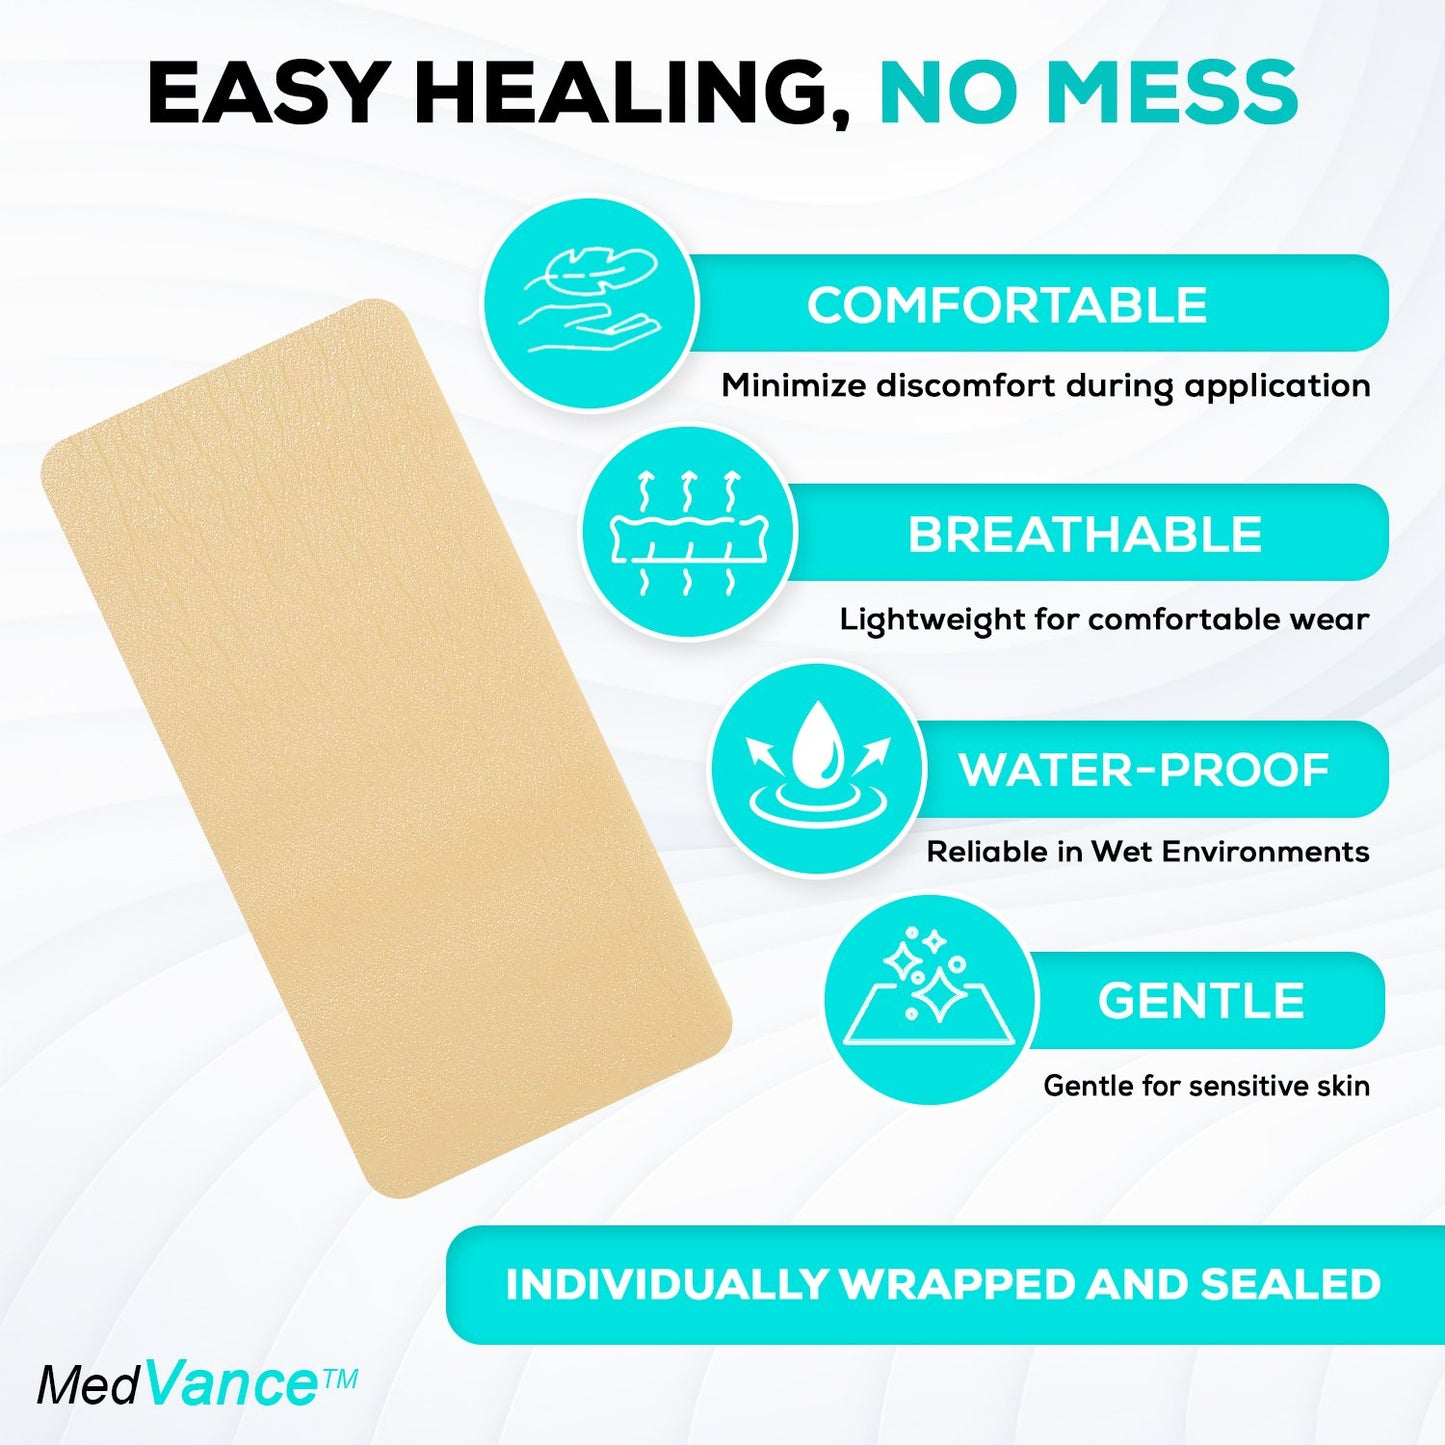 MedVance Silicone Non-Bordered Adhesive Wound Dressing, 4"x8", Box of 5